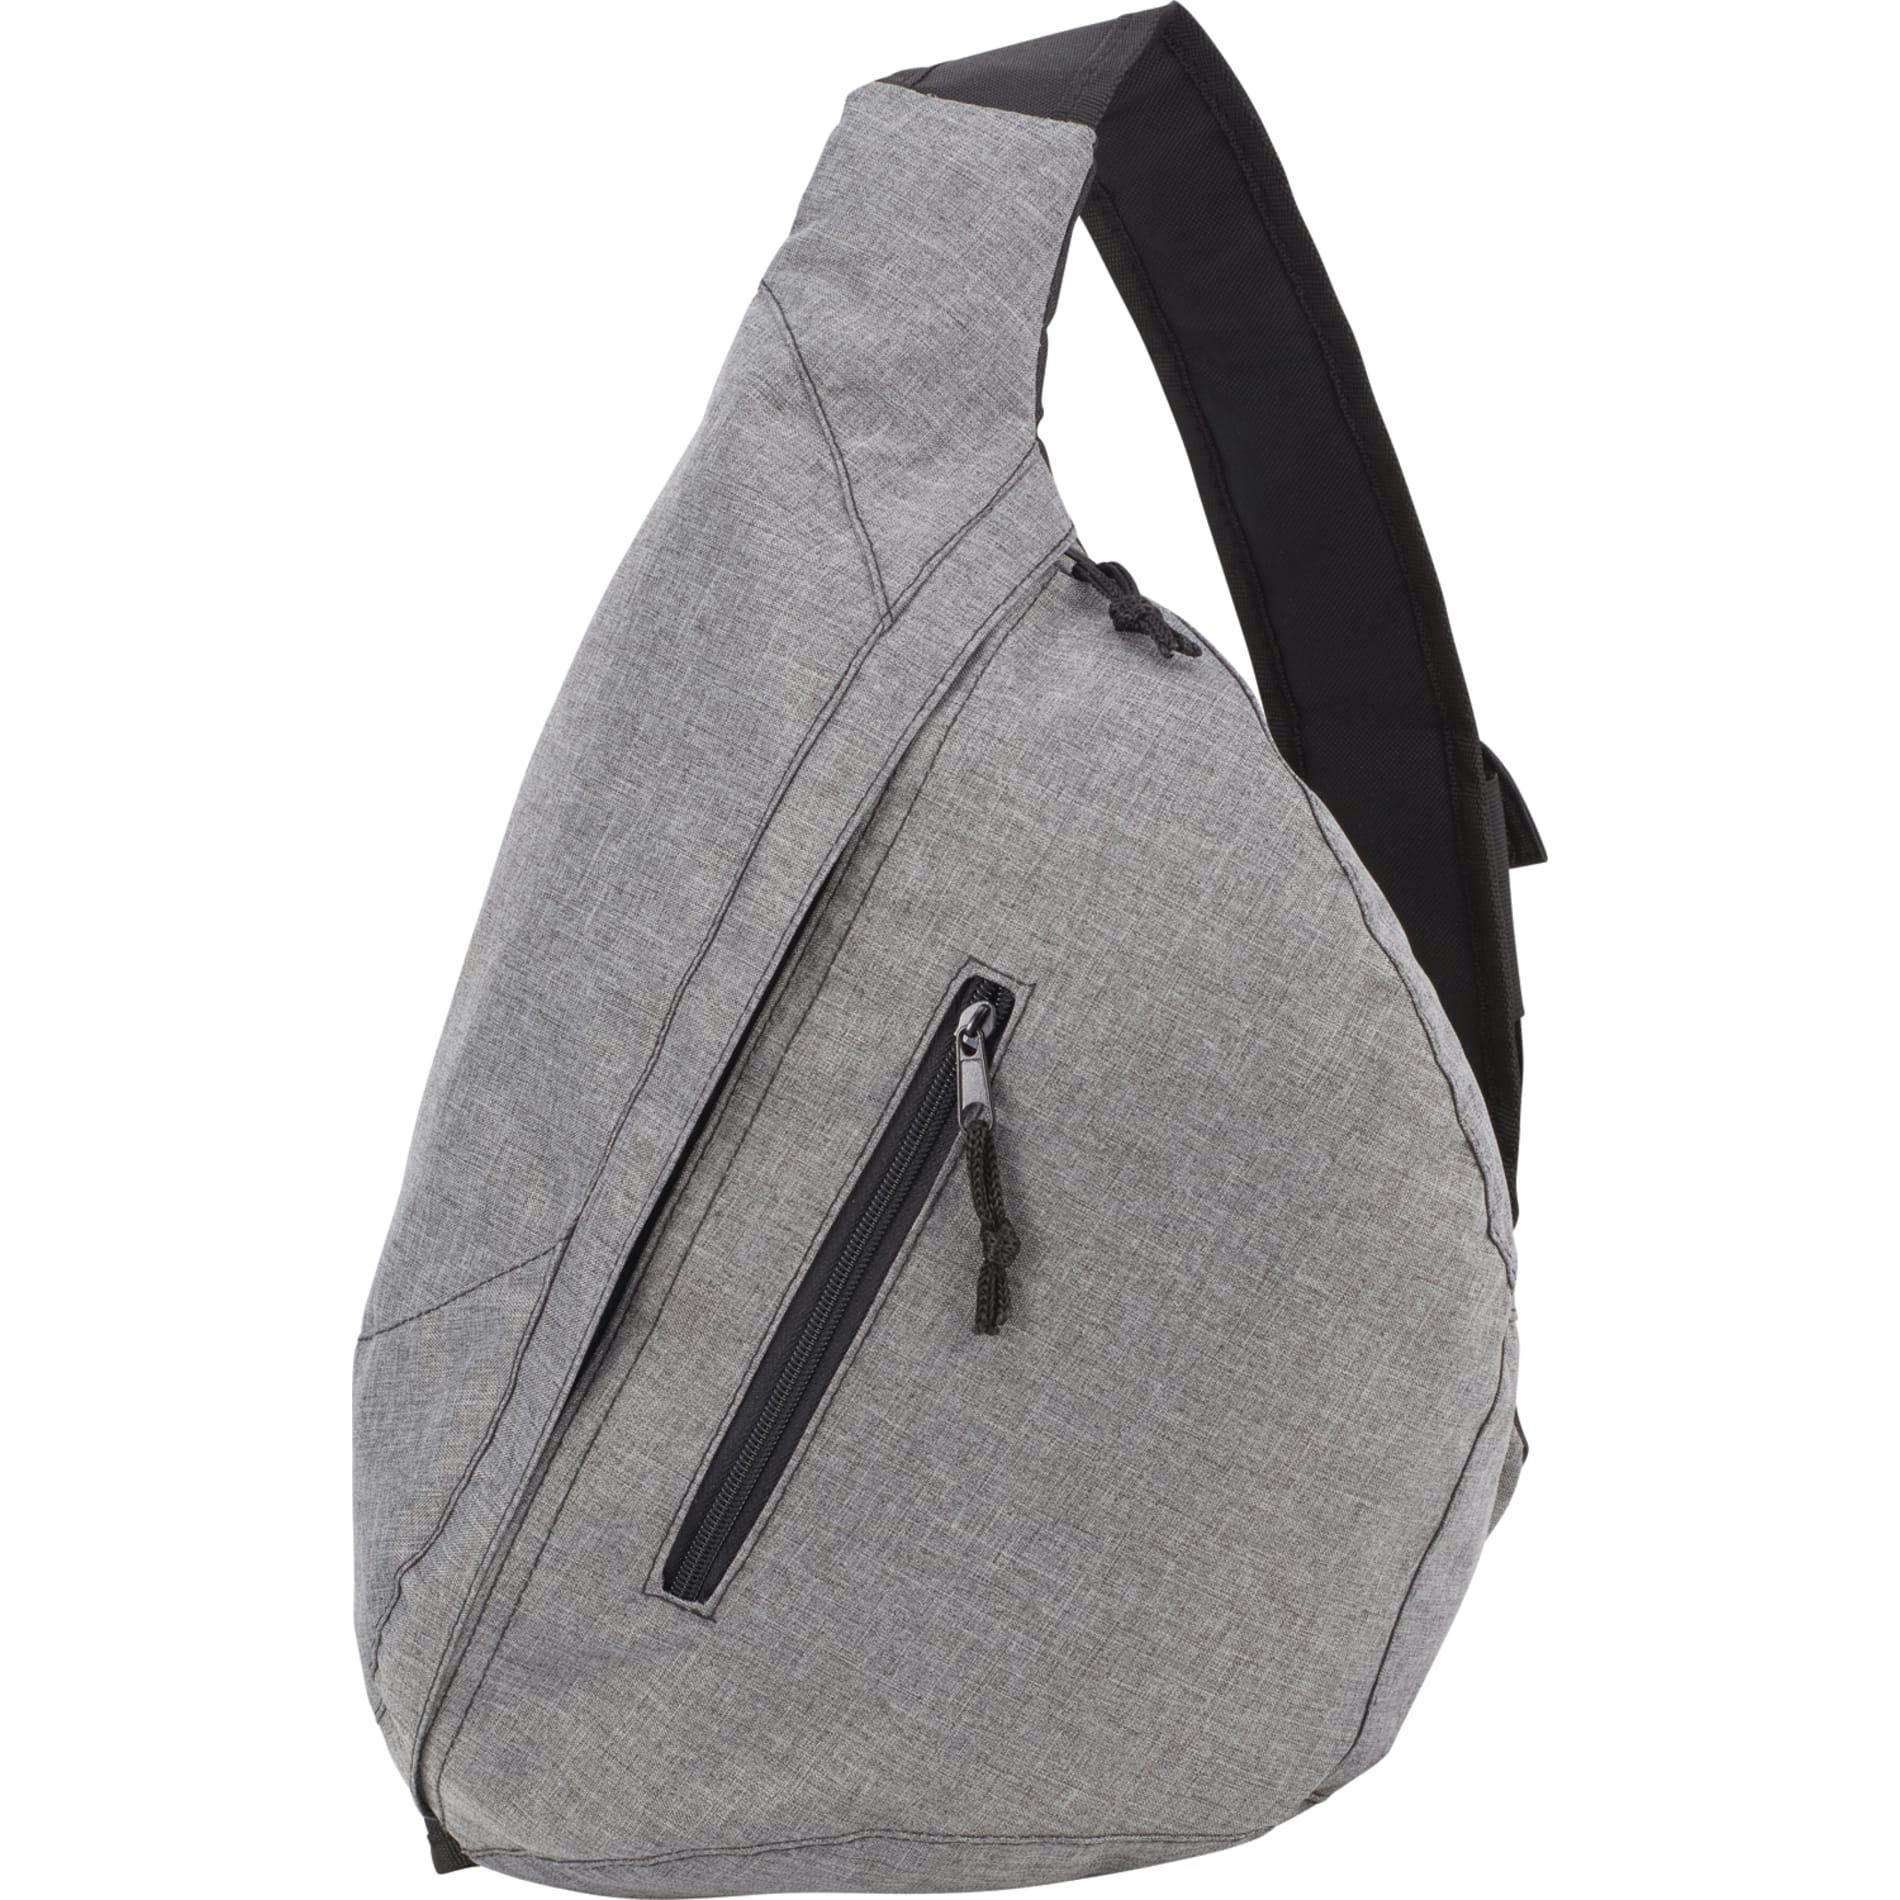 Brooklyn Deluxe Sling Backpack - additional Image 5